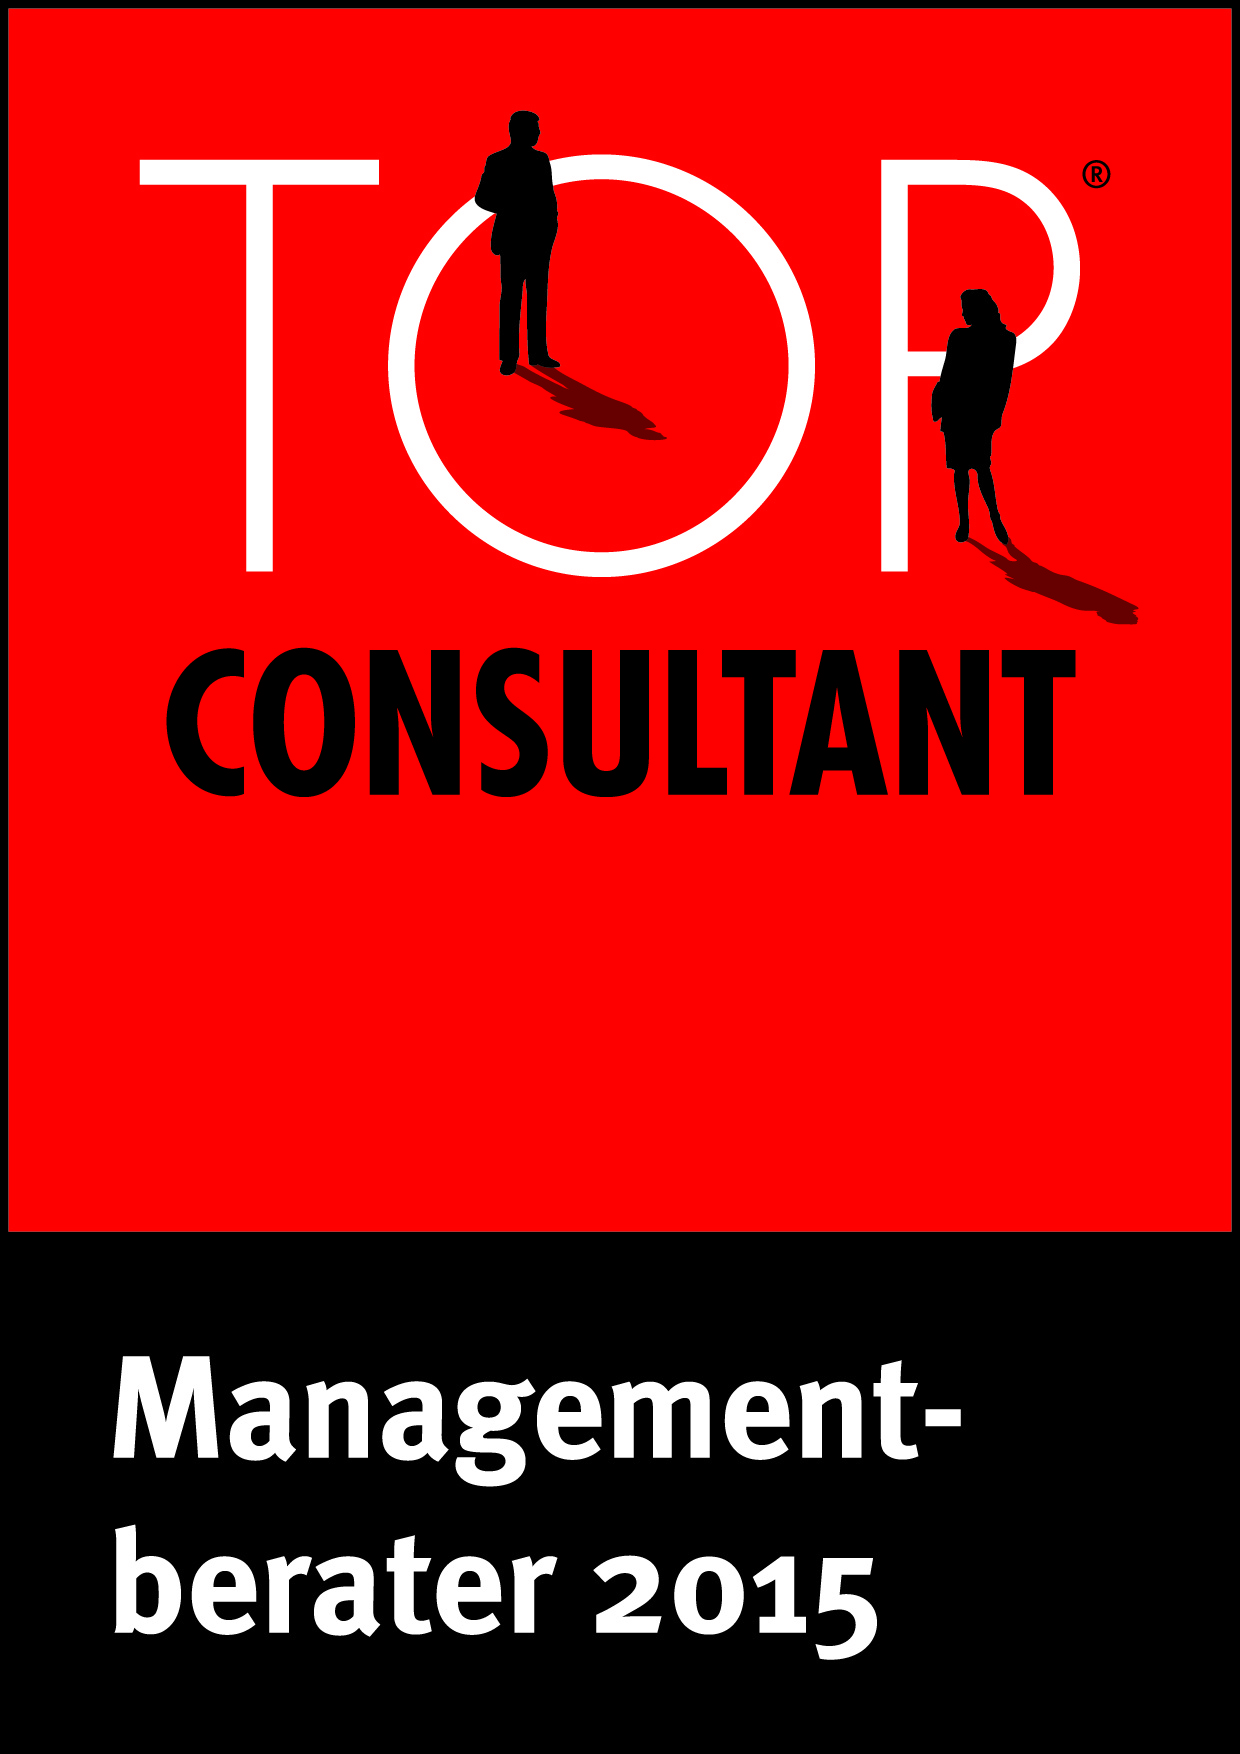 KFT Top Consultant